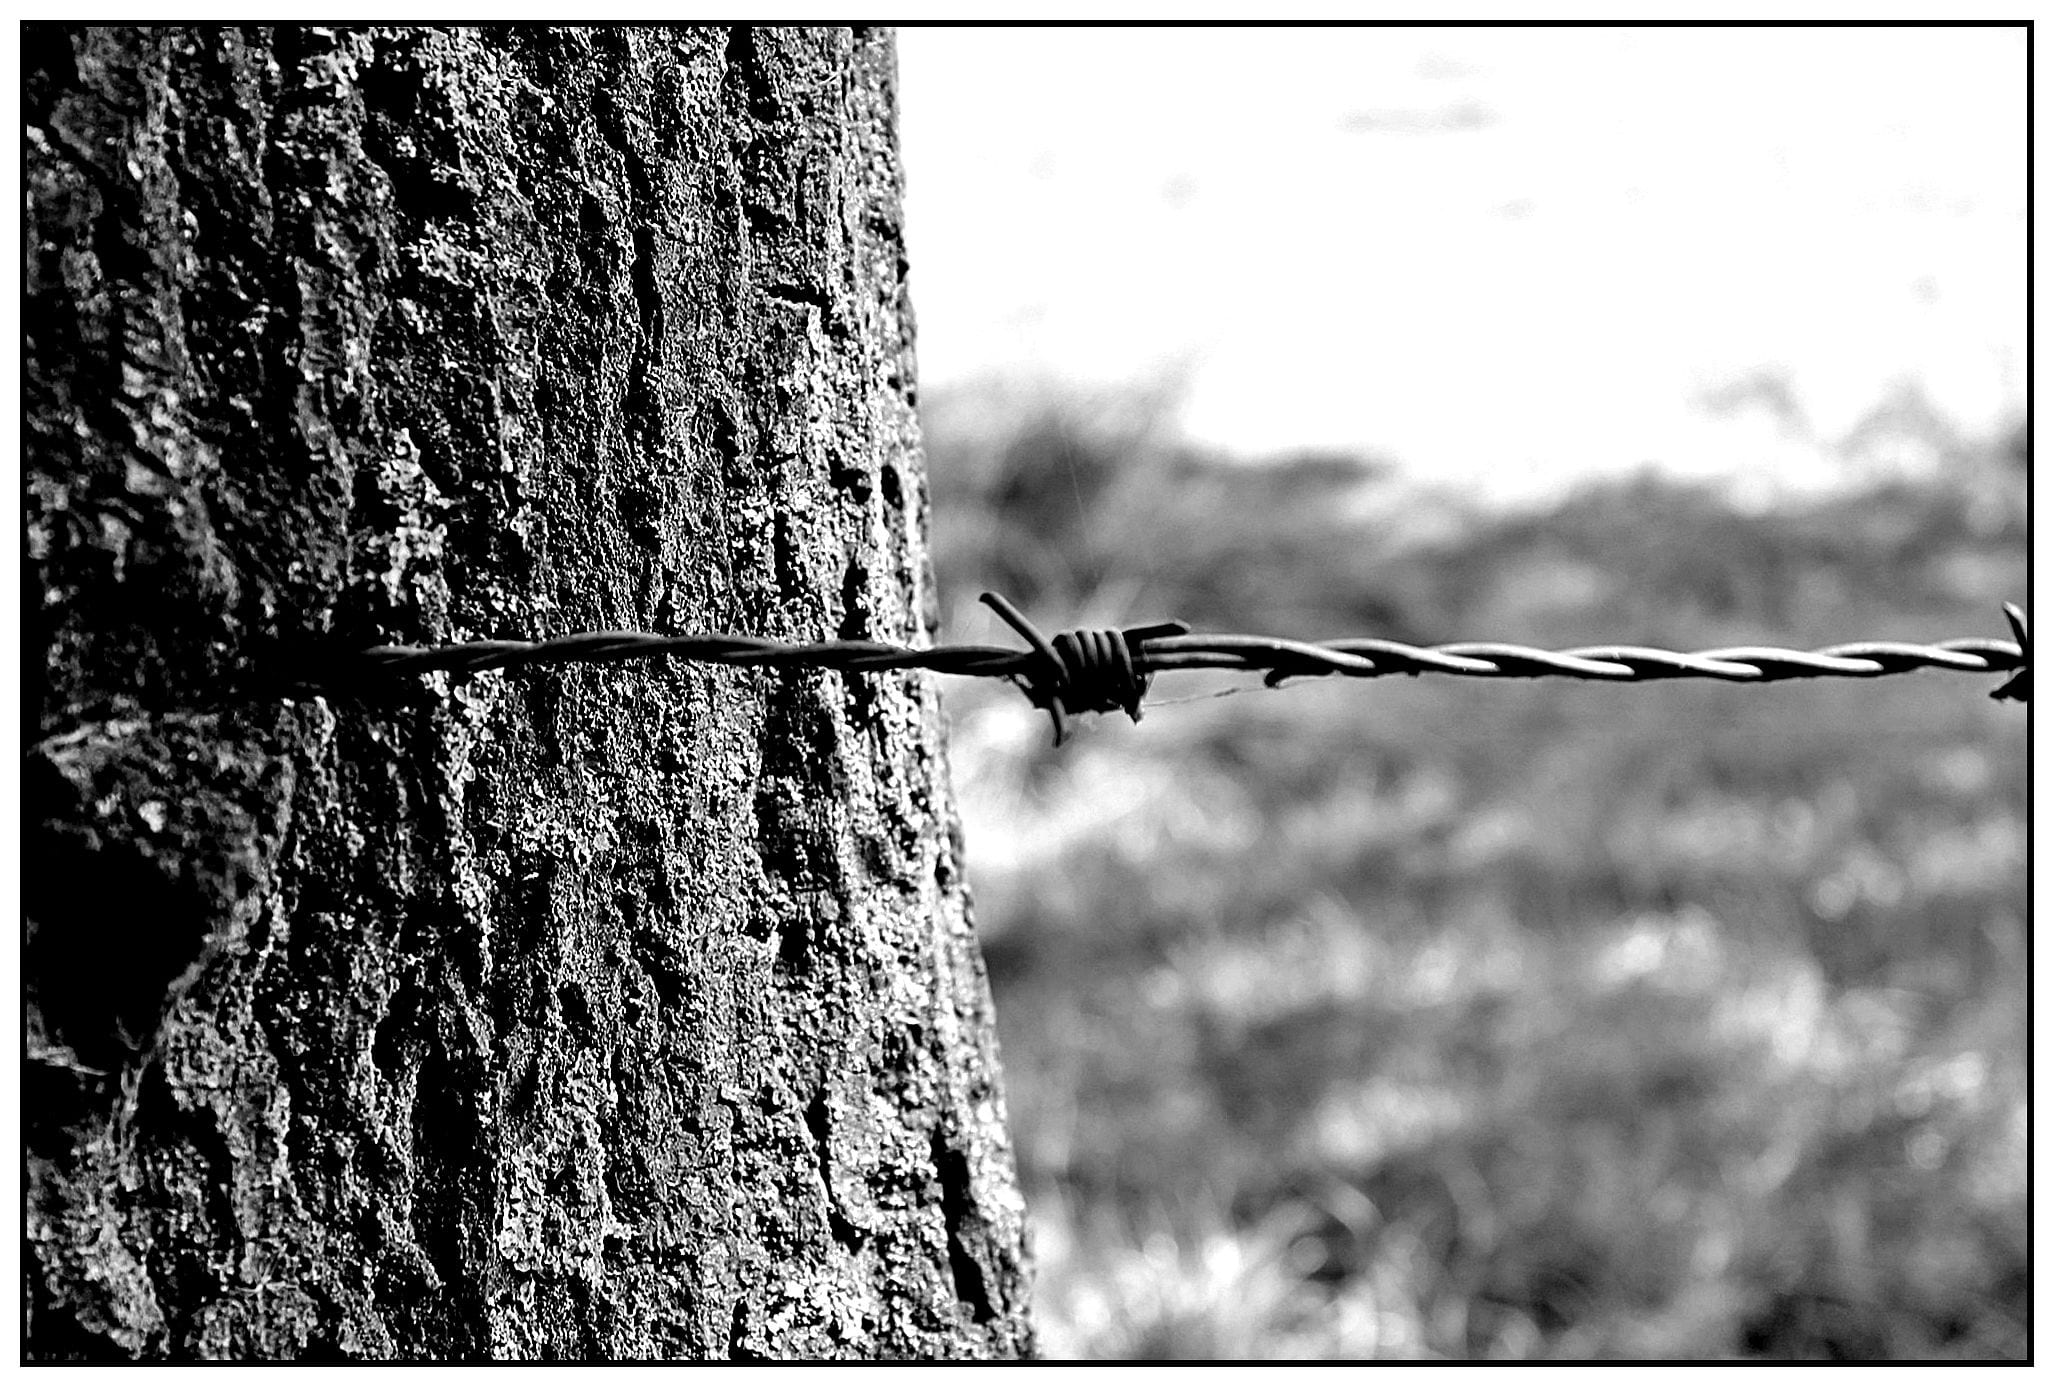 barbed wire, fence, metal, thorn, limit, wiring, pointed, demarcation